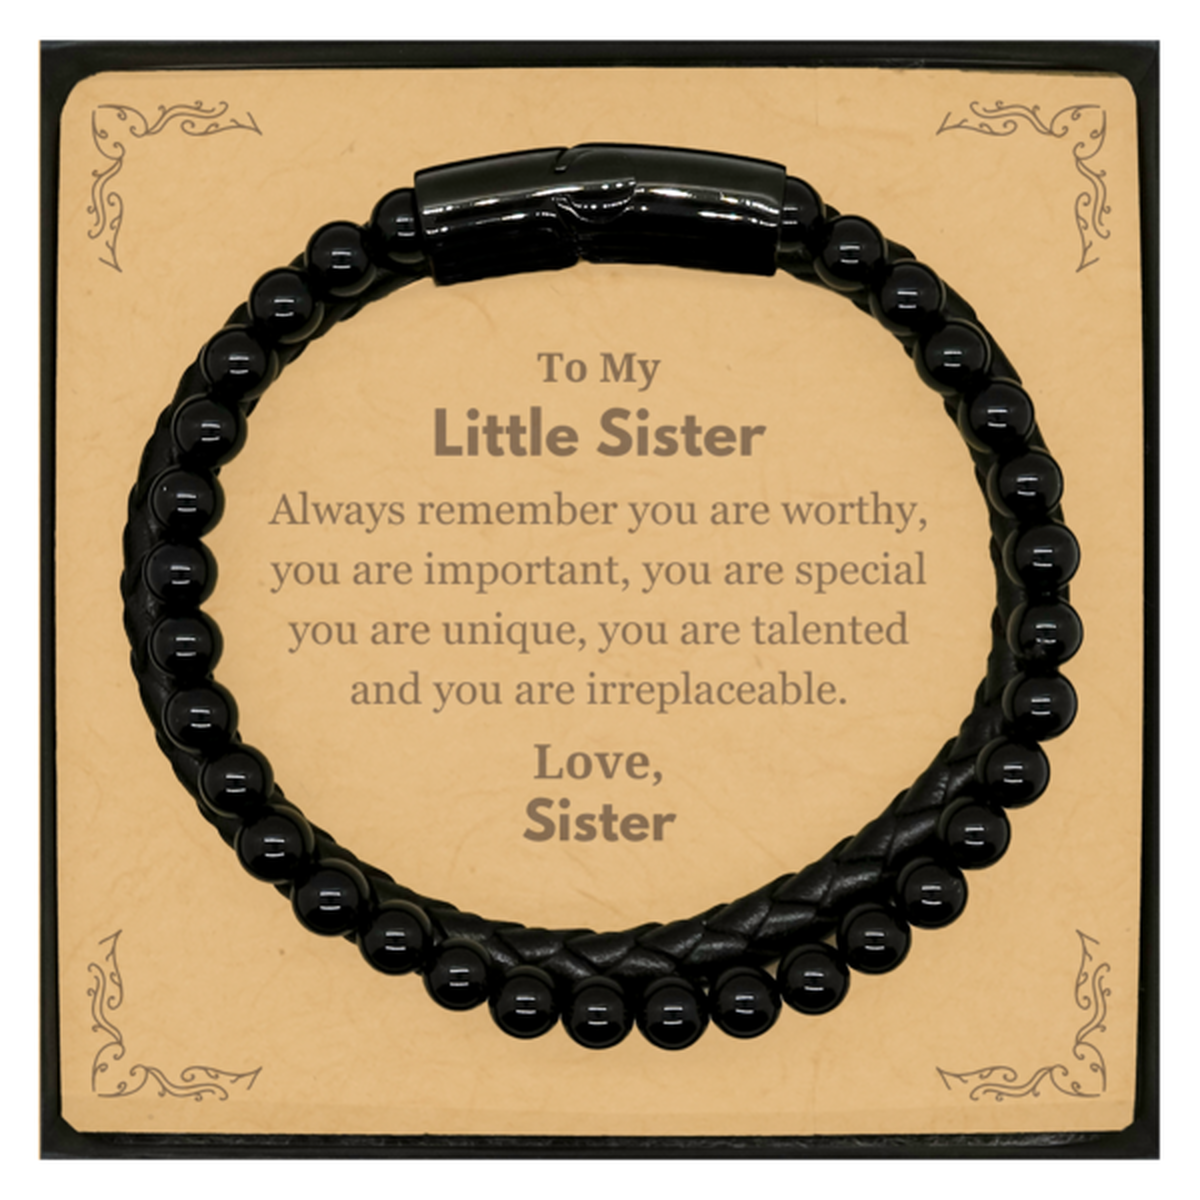 Little Sister Birthday Gifts from Sister, Inspirational Stone Leather Bracelets for Little Sister Christmas Graduation Gifts for Little Sister Always remember you are worthy, you are important. Love, Sister